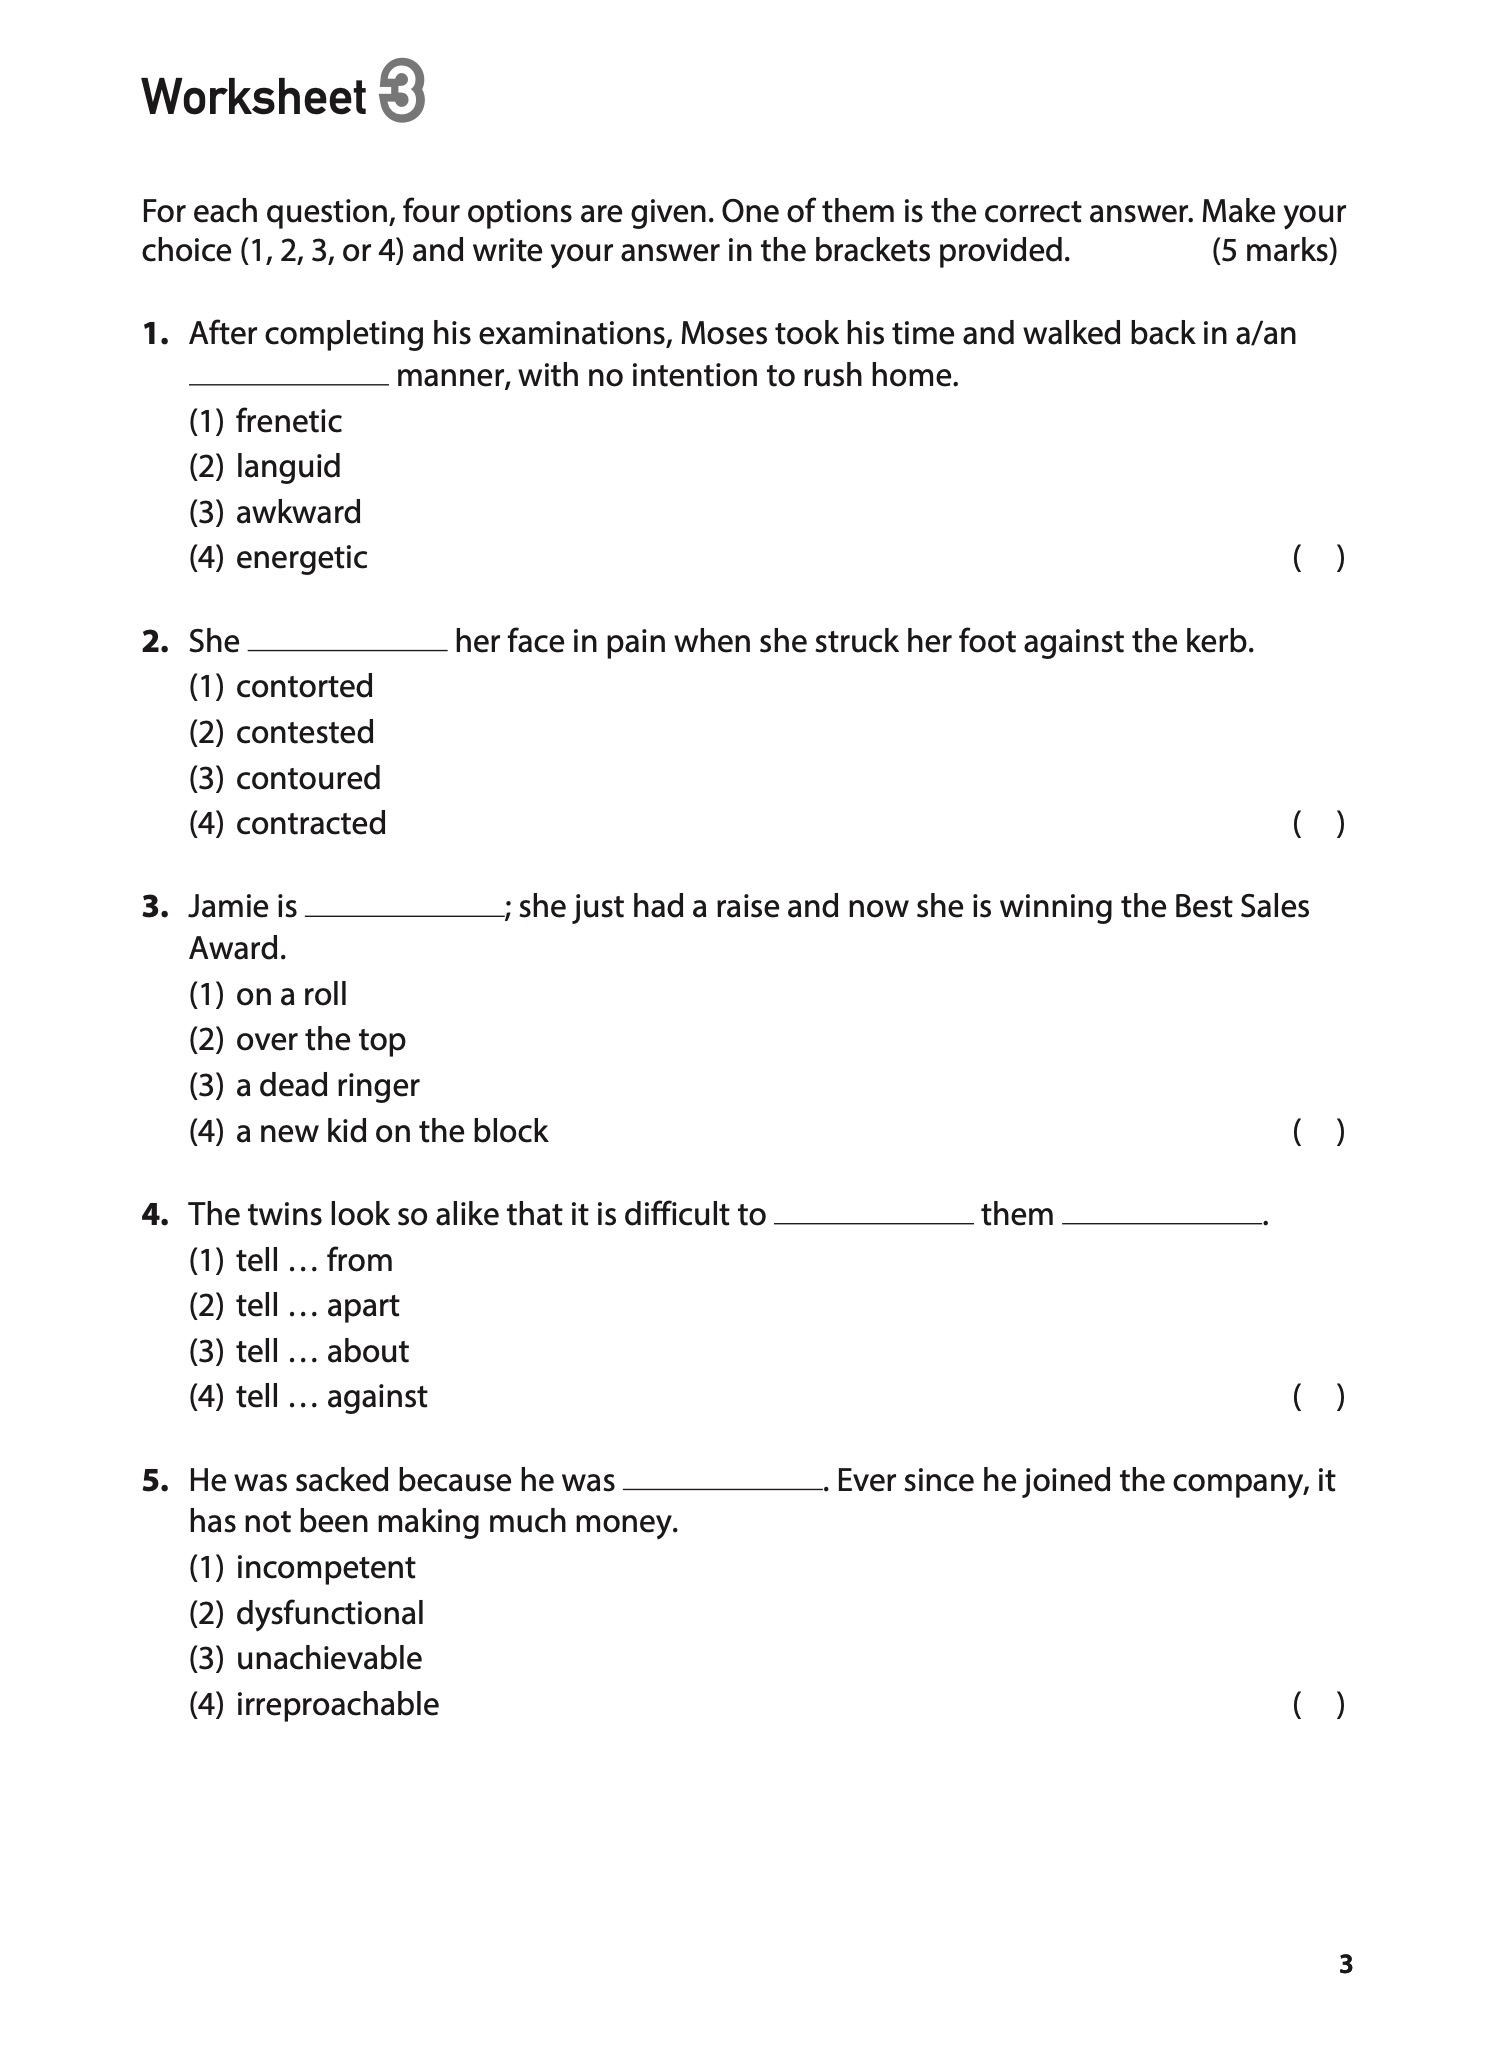 100-english-worksheets-primary-5-6-vocabulary-mcq-cpd-singapore-education-services-pte-ltd